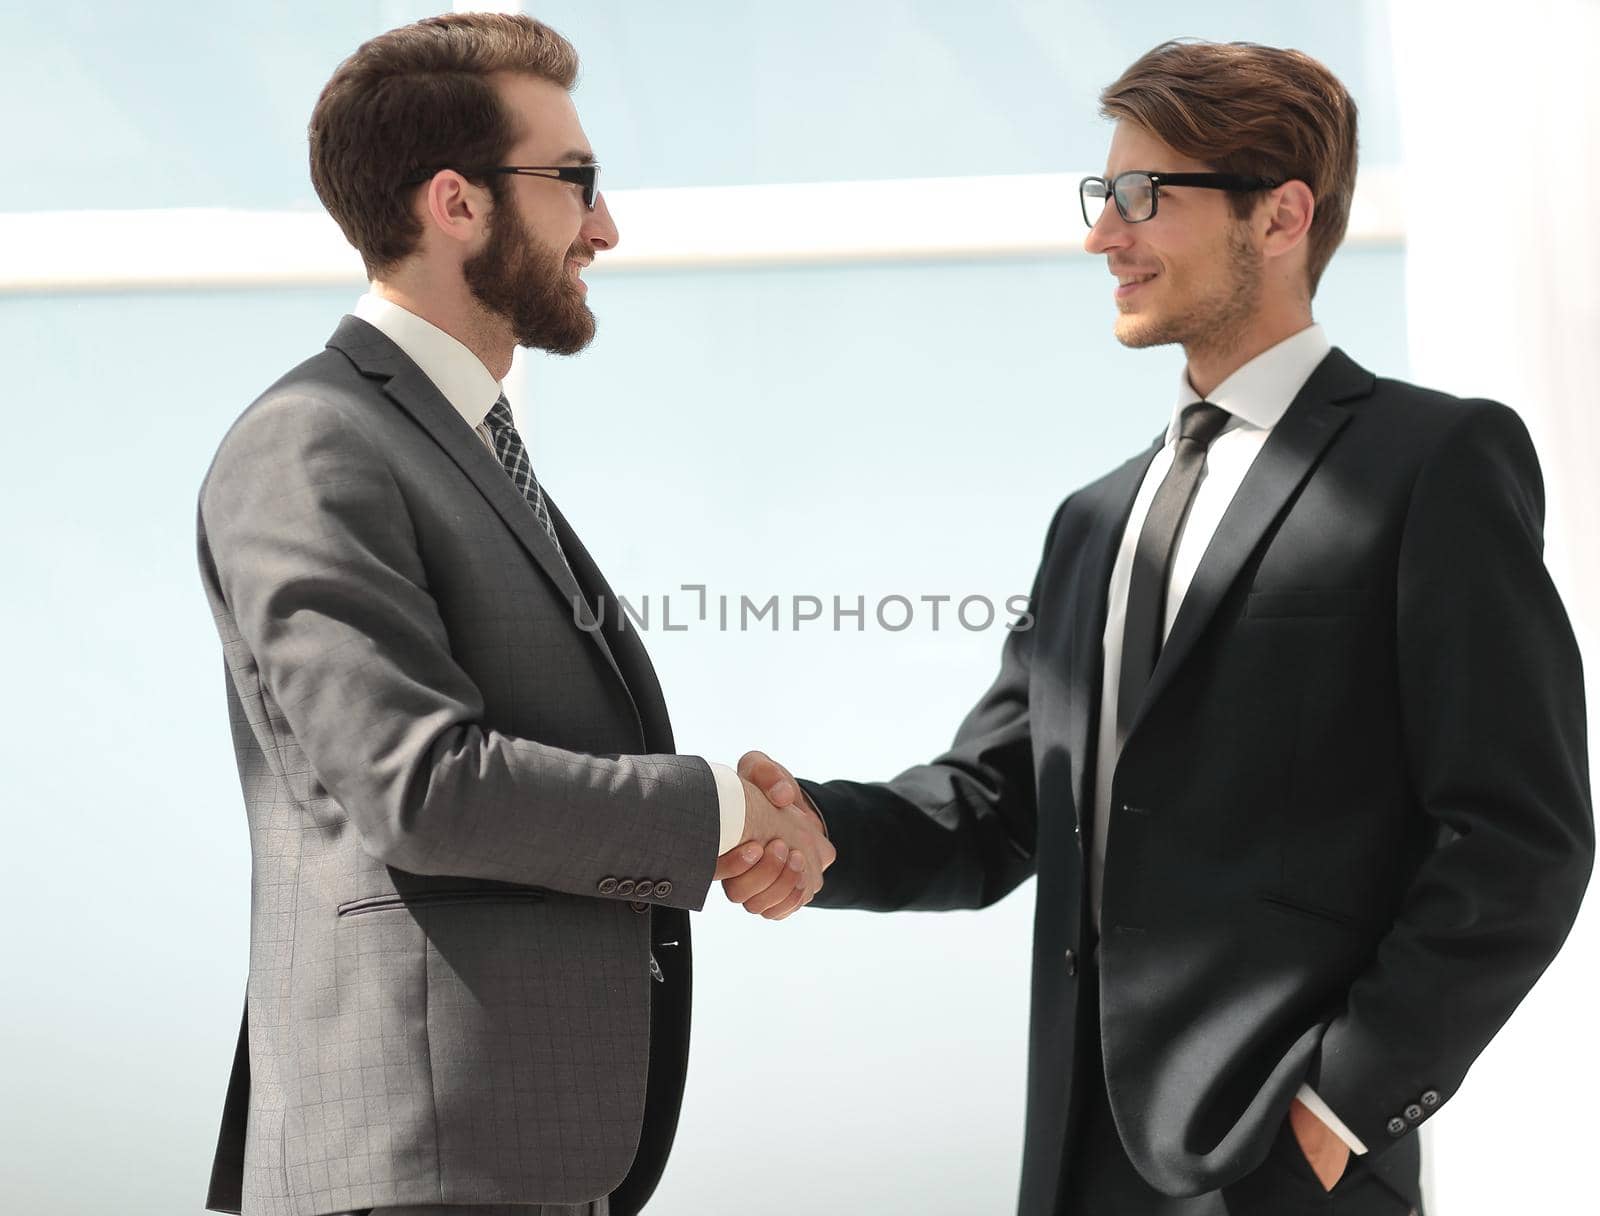 two business people shaking hands .photo with copy space